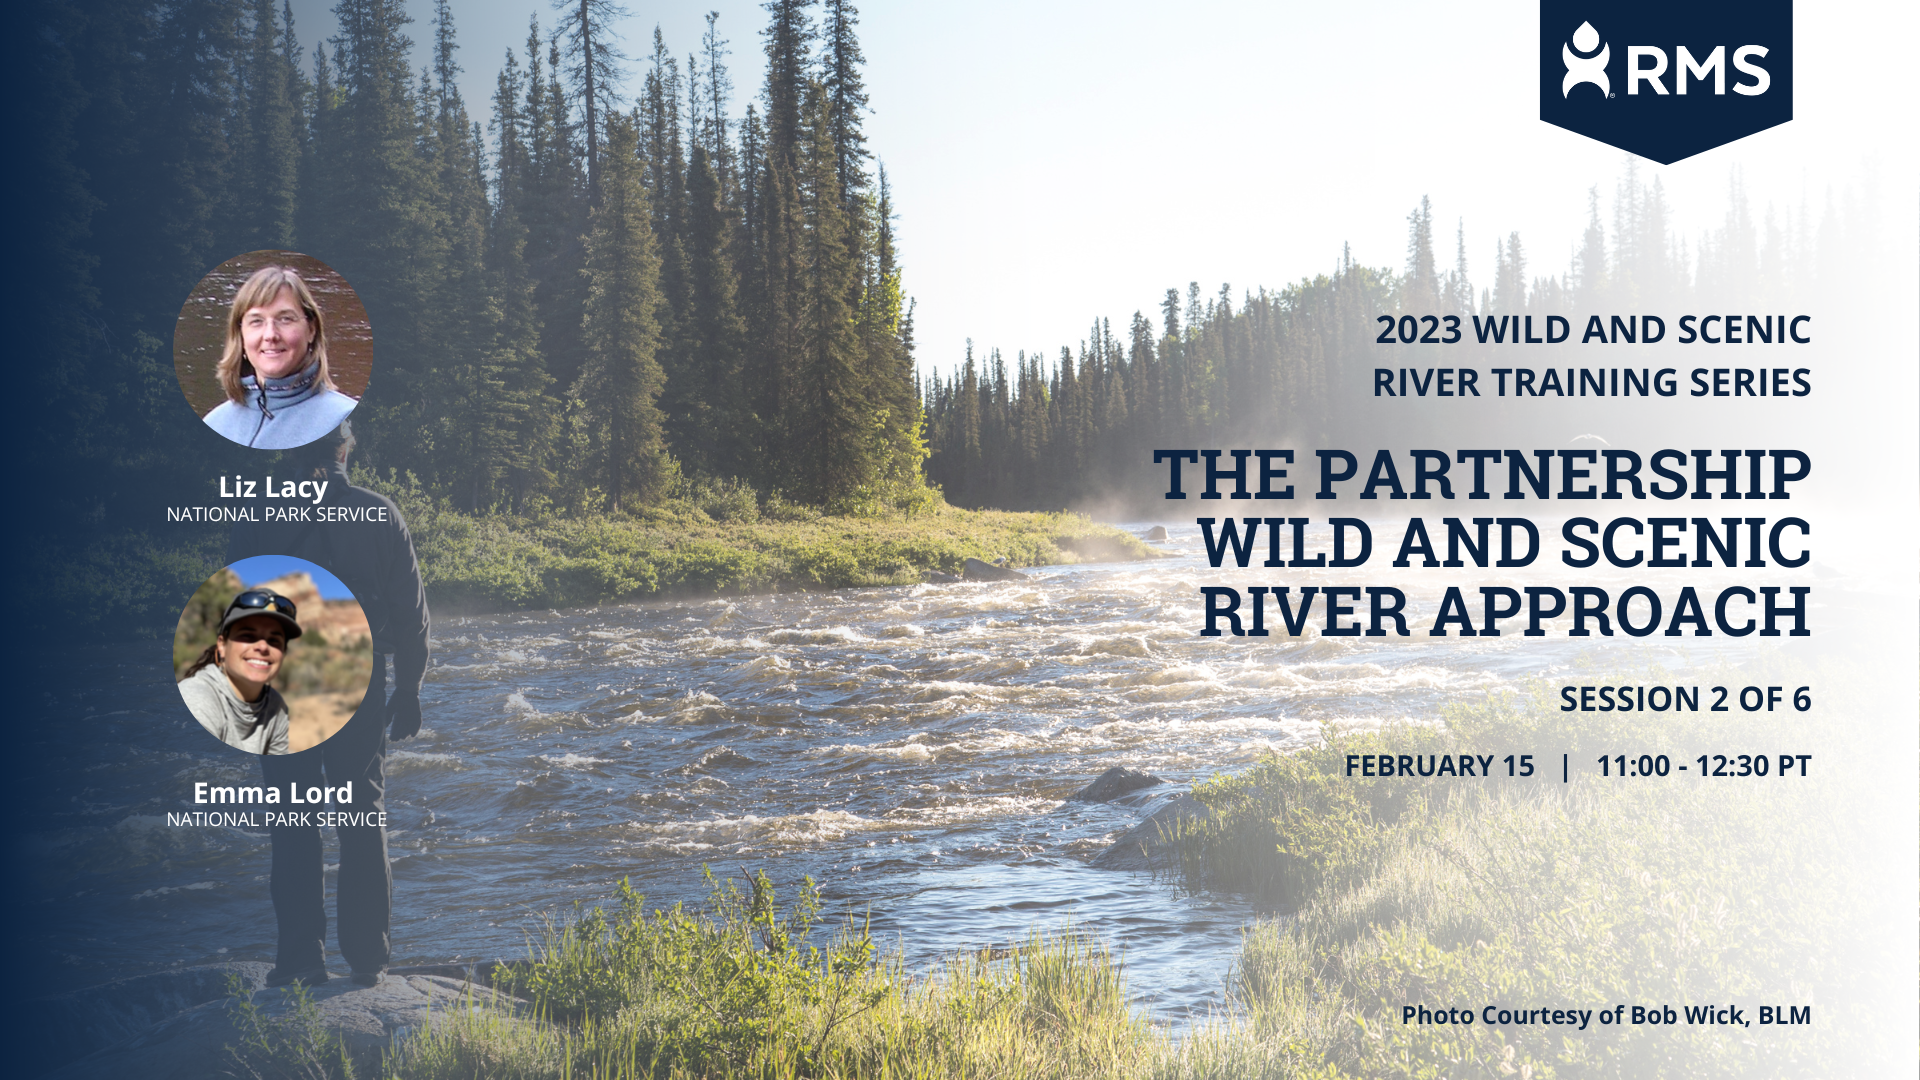 The Partnership Wild and Scenic Rivers Approach